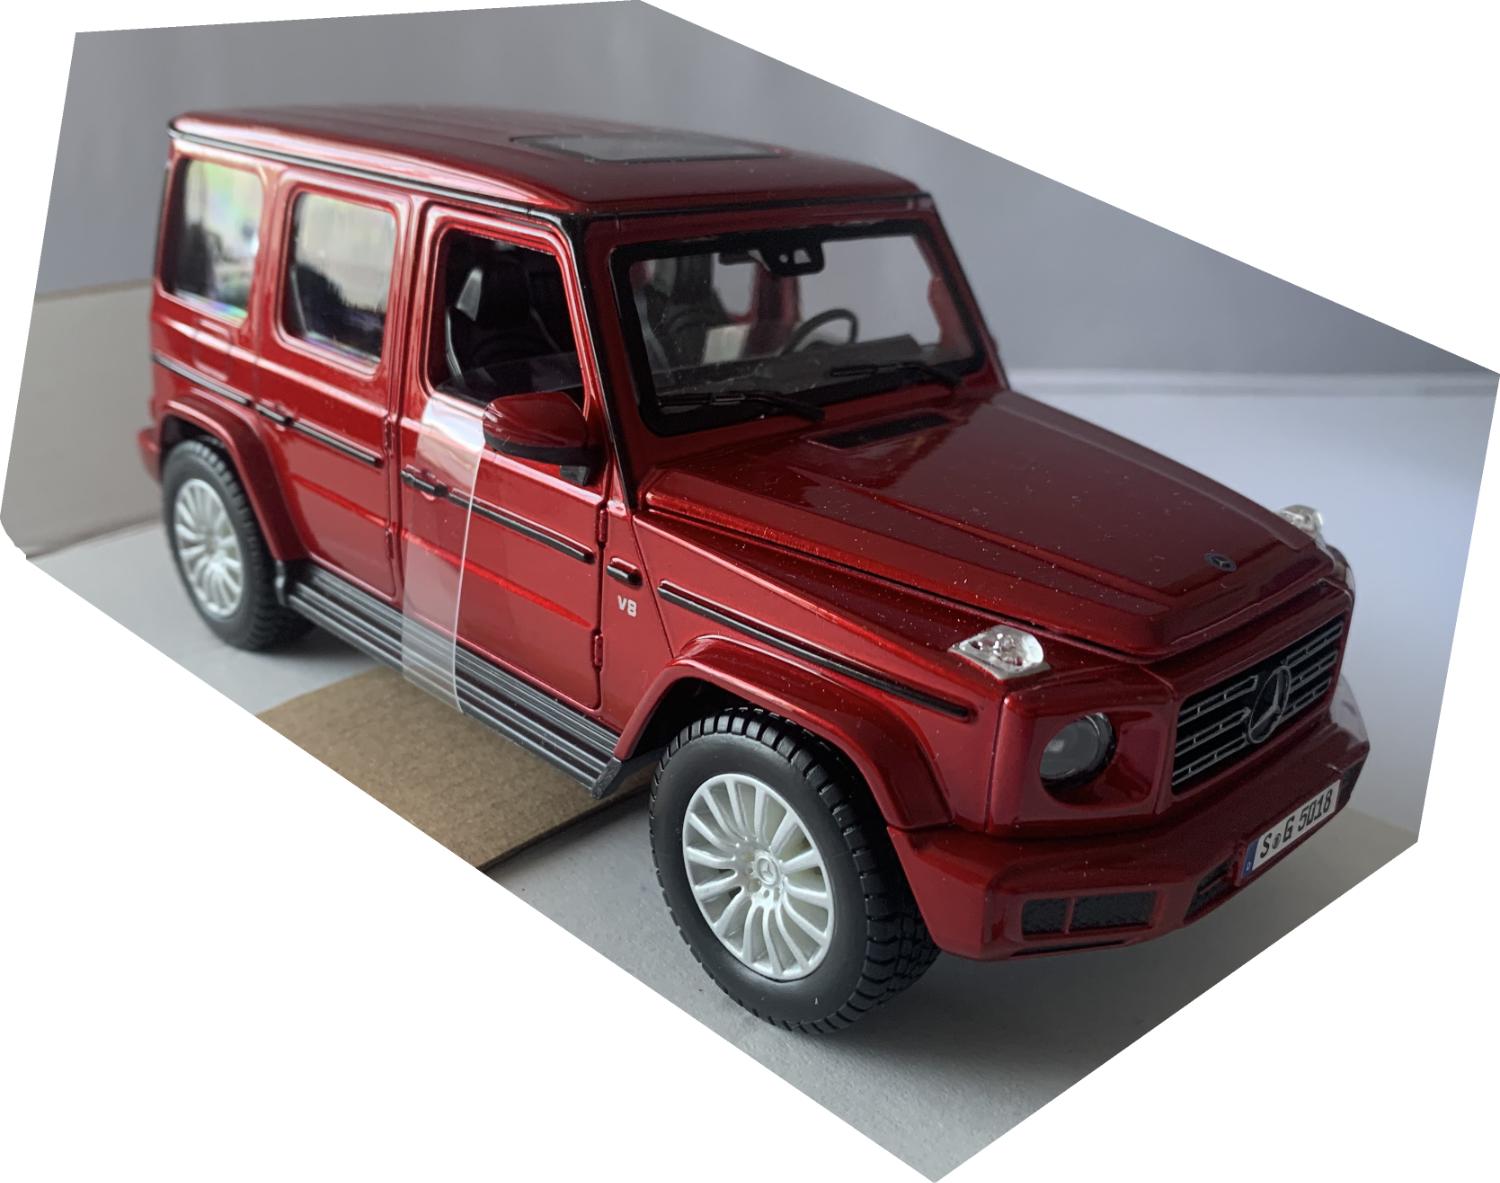 A good reproduction of the Mercedes Benz G Class with detail throughout, all authentically recreated. The model is mounted on a removable plinth and presented in a window display